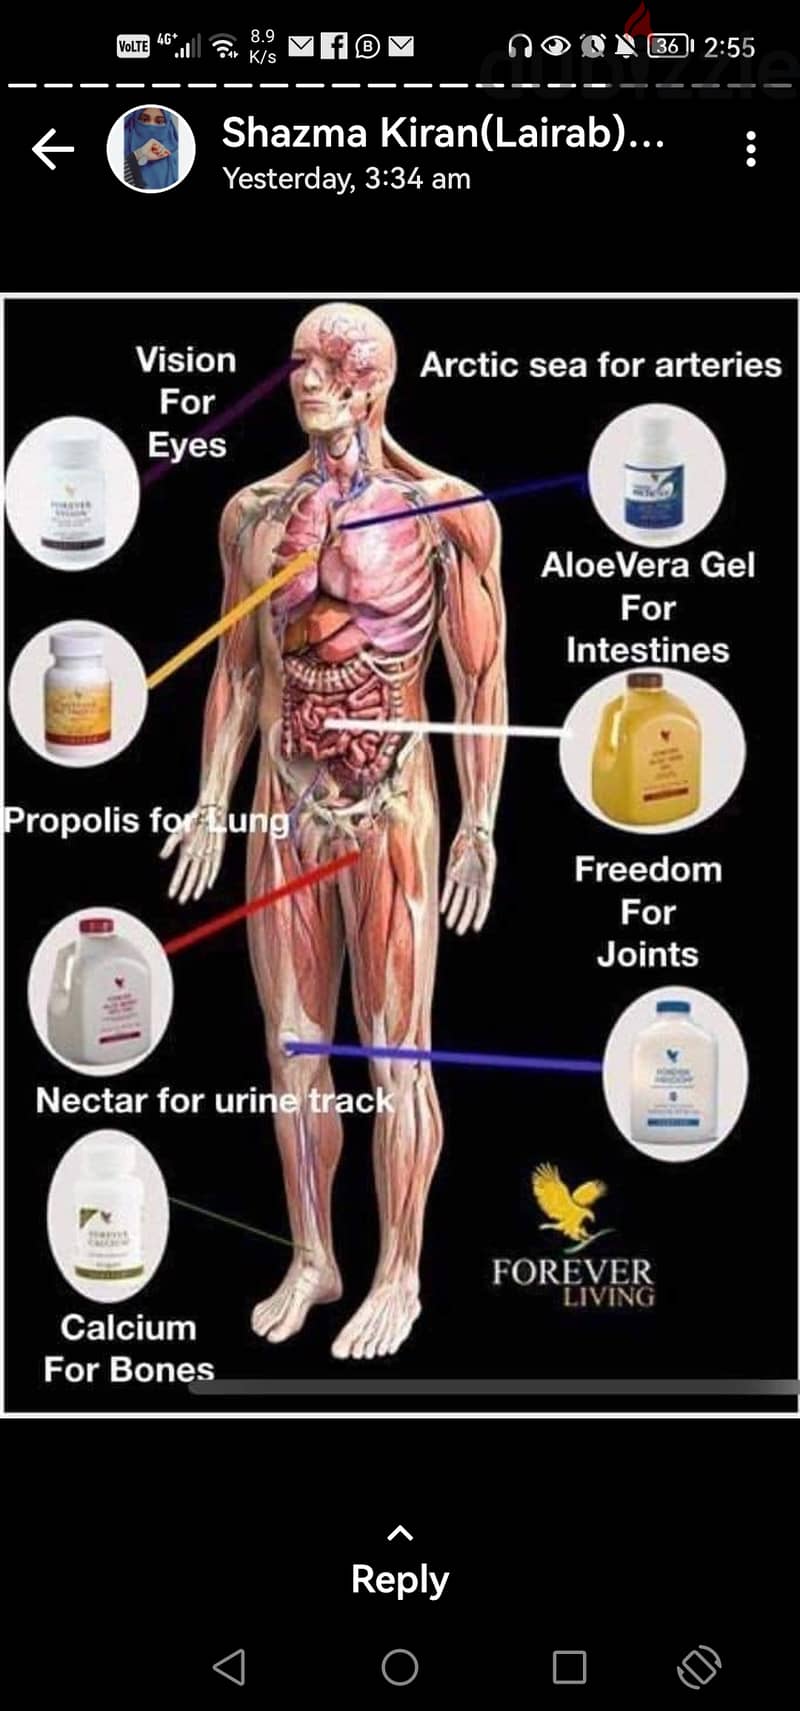 Forever living products 8